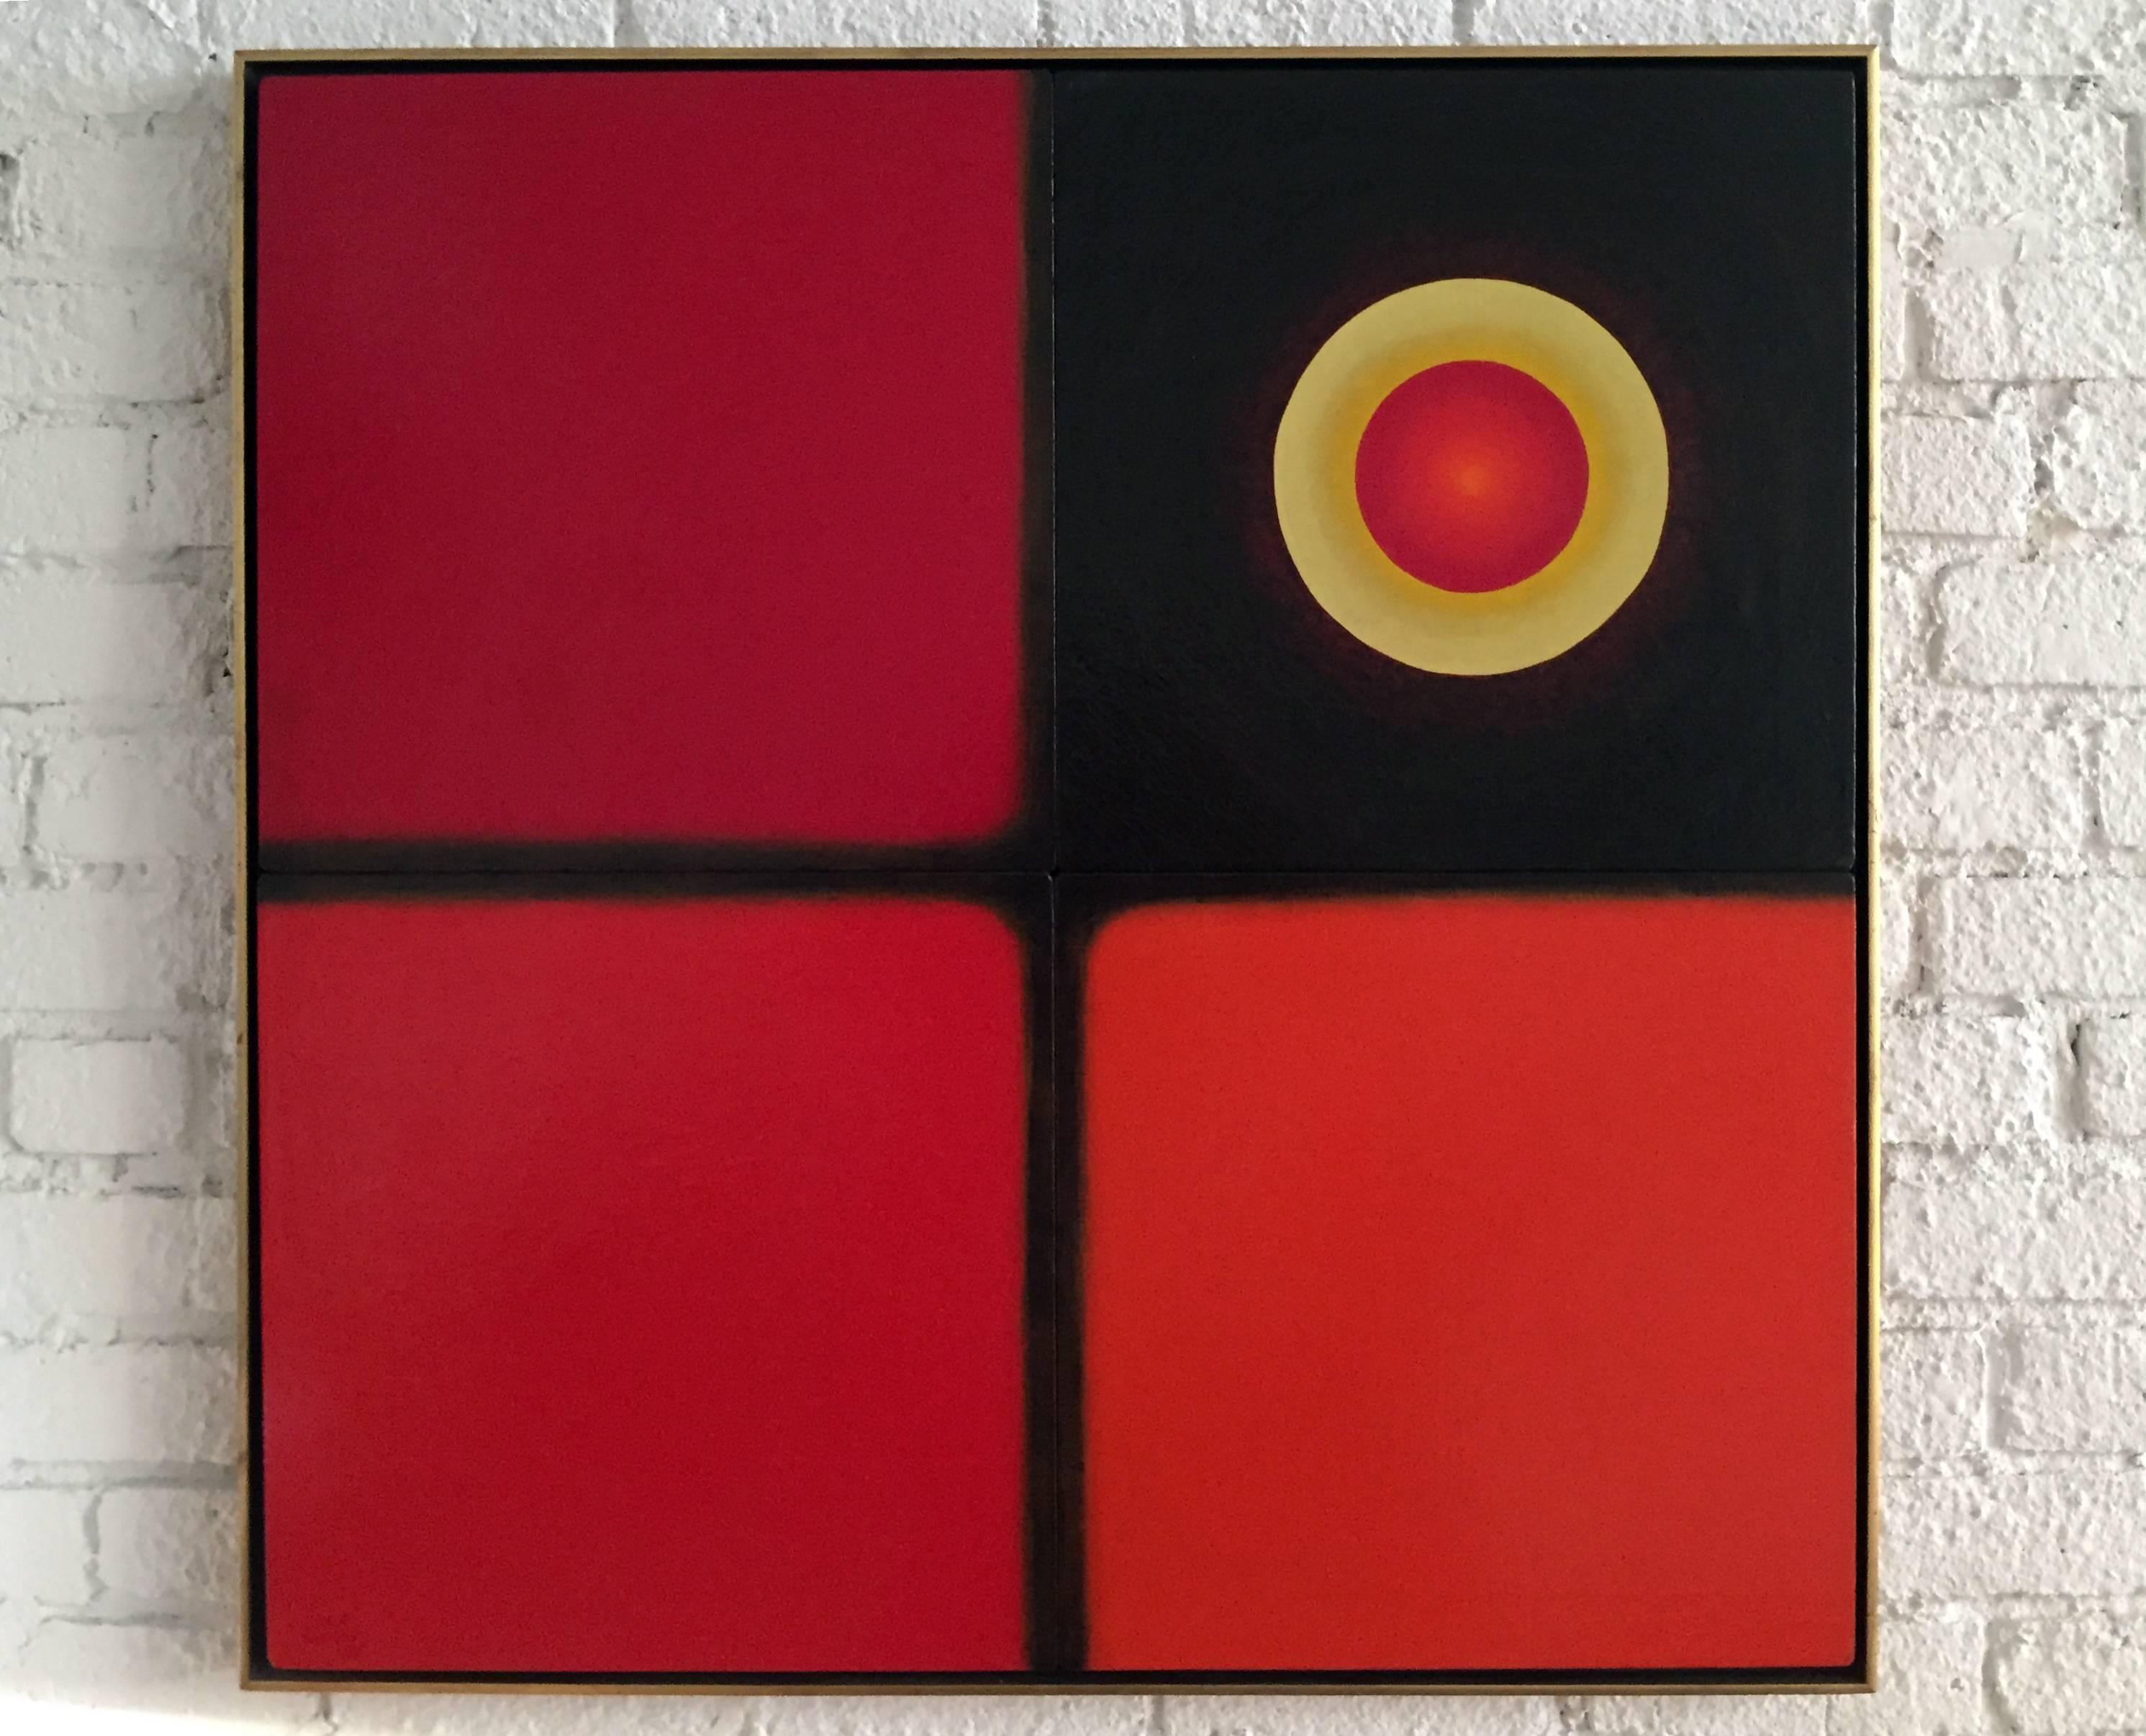 Oil on canvas by Ernst Halpern, 1965, Los Angeles, California.
Signed lower left. Tag on reverse.